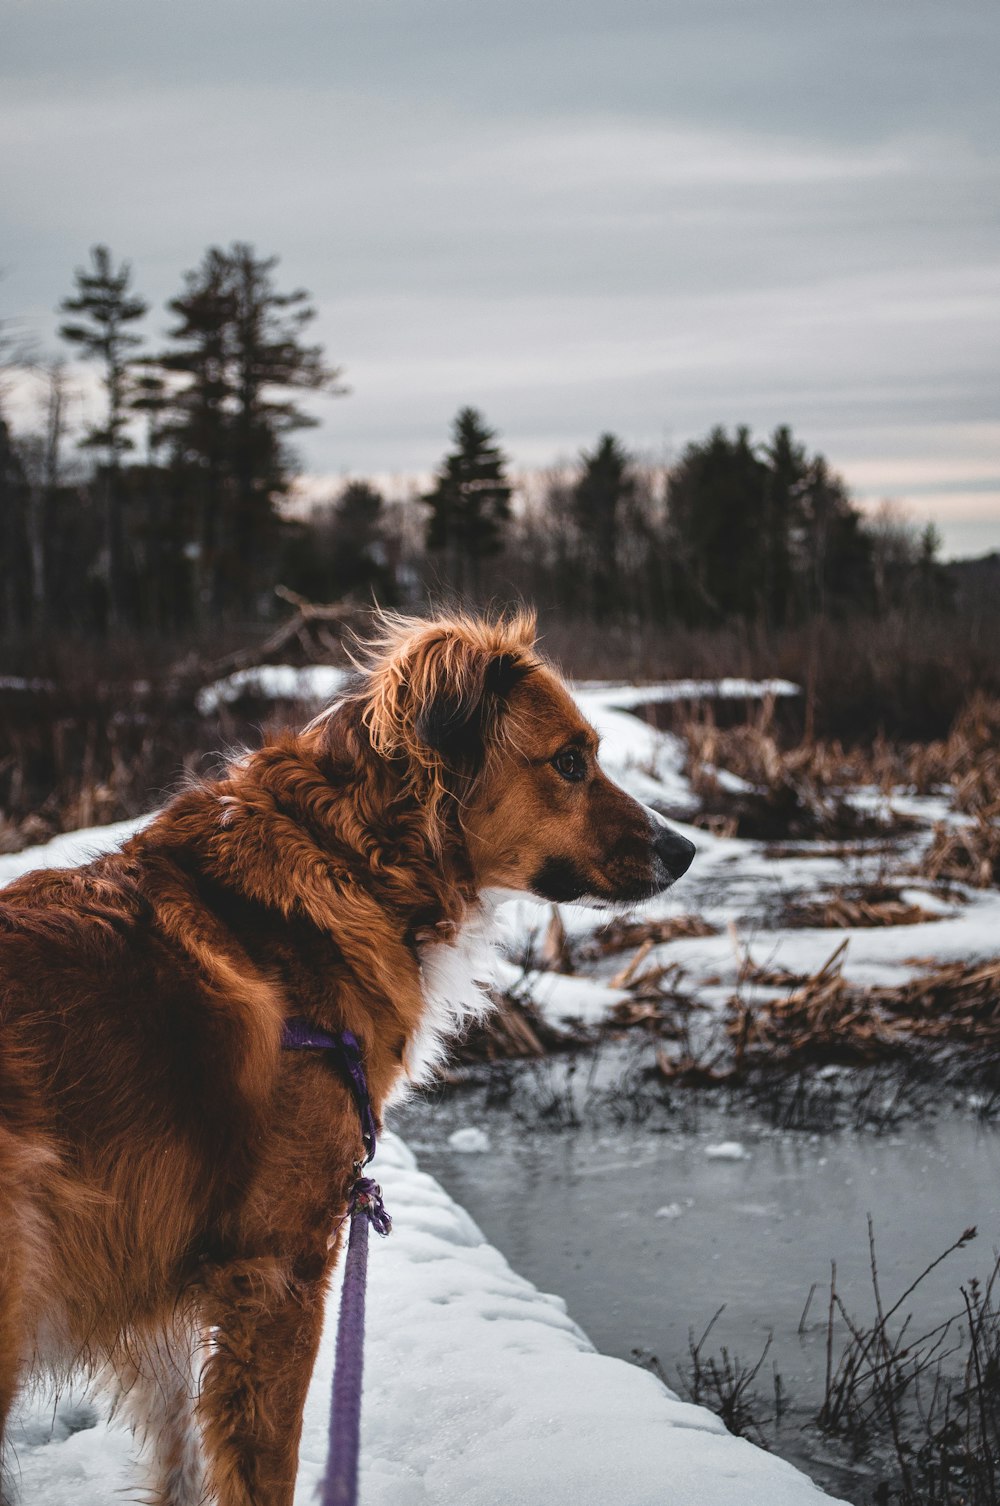 long-coated brown dog standing near body of water during winter season